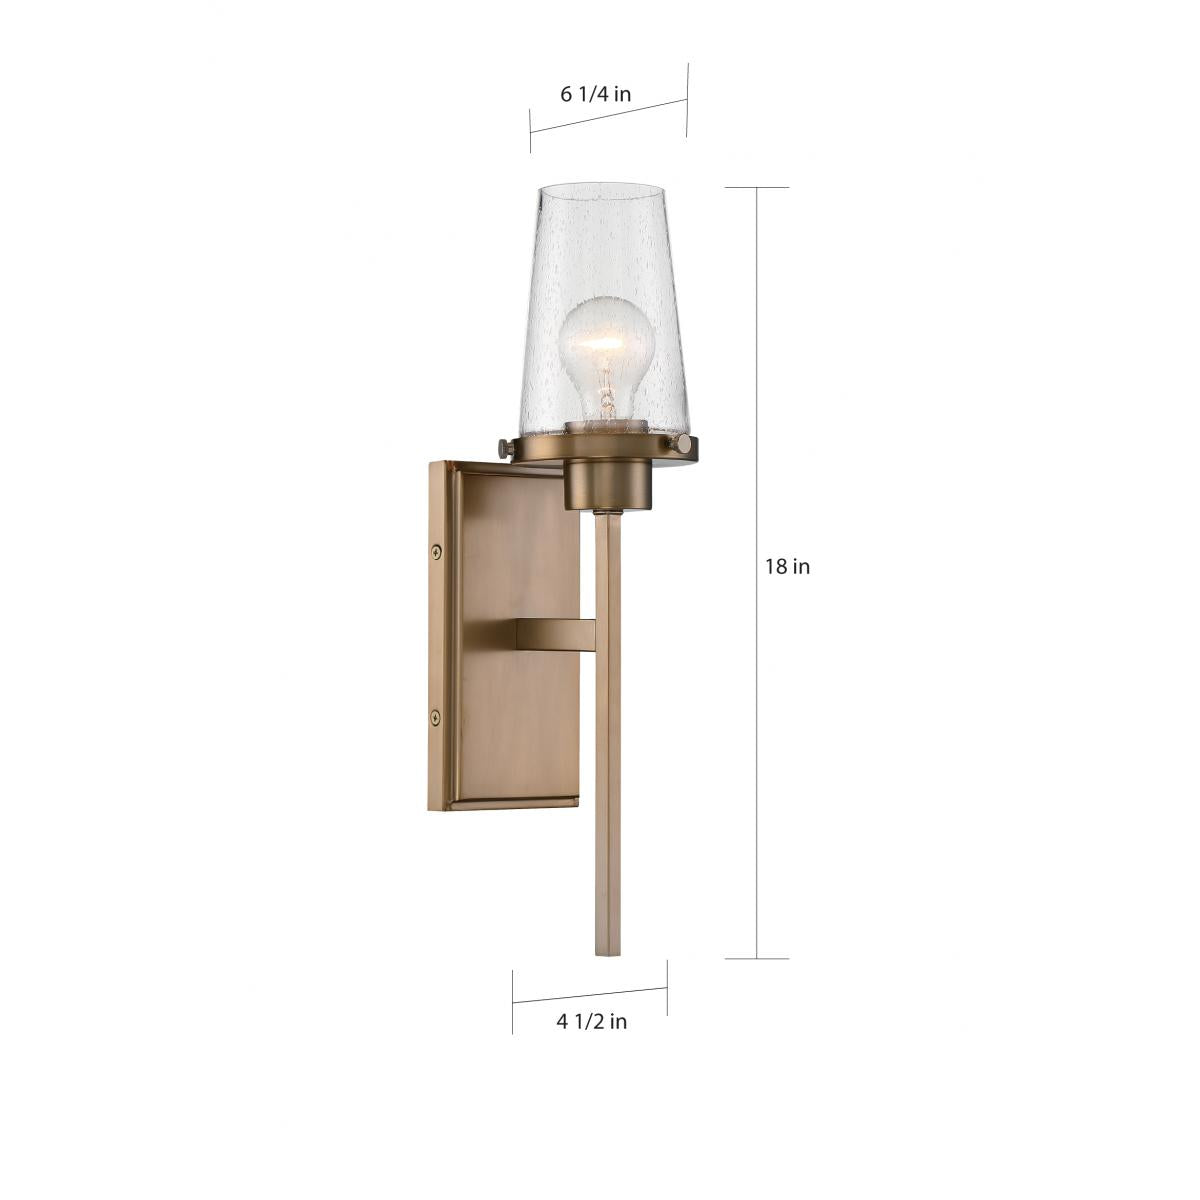 Rector- 1 Light Wall Sconce with Clear Glass - Burnished Brass Finish